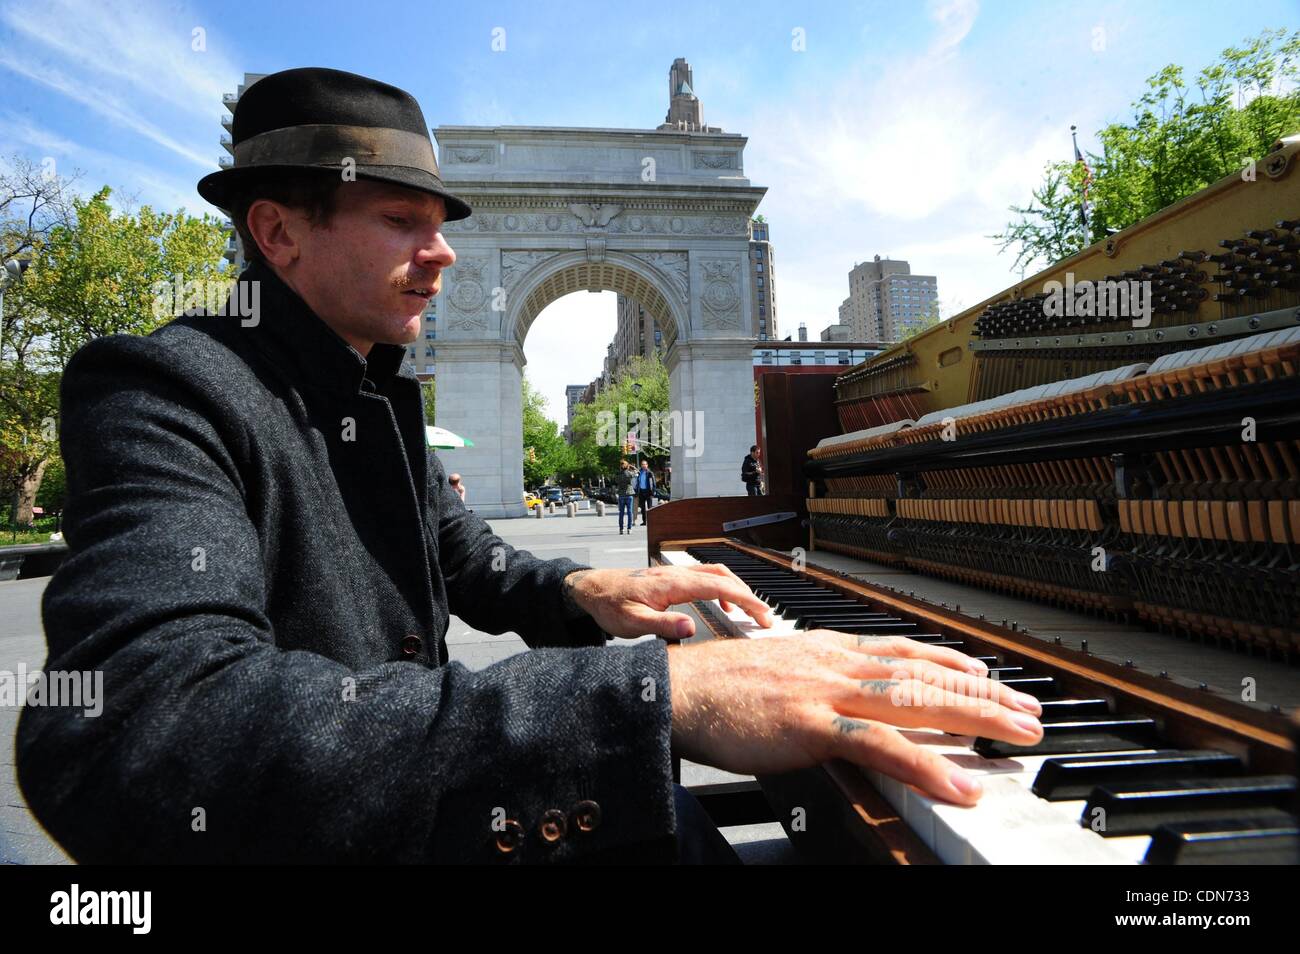 Colin Huggins plays his piano at Washington Square Park in New York on  March 9, 2013. Huggins moved to New York ten years ago from Boston and  worked as an accompanist for